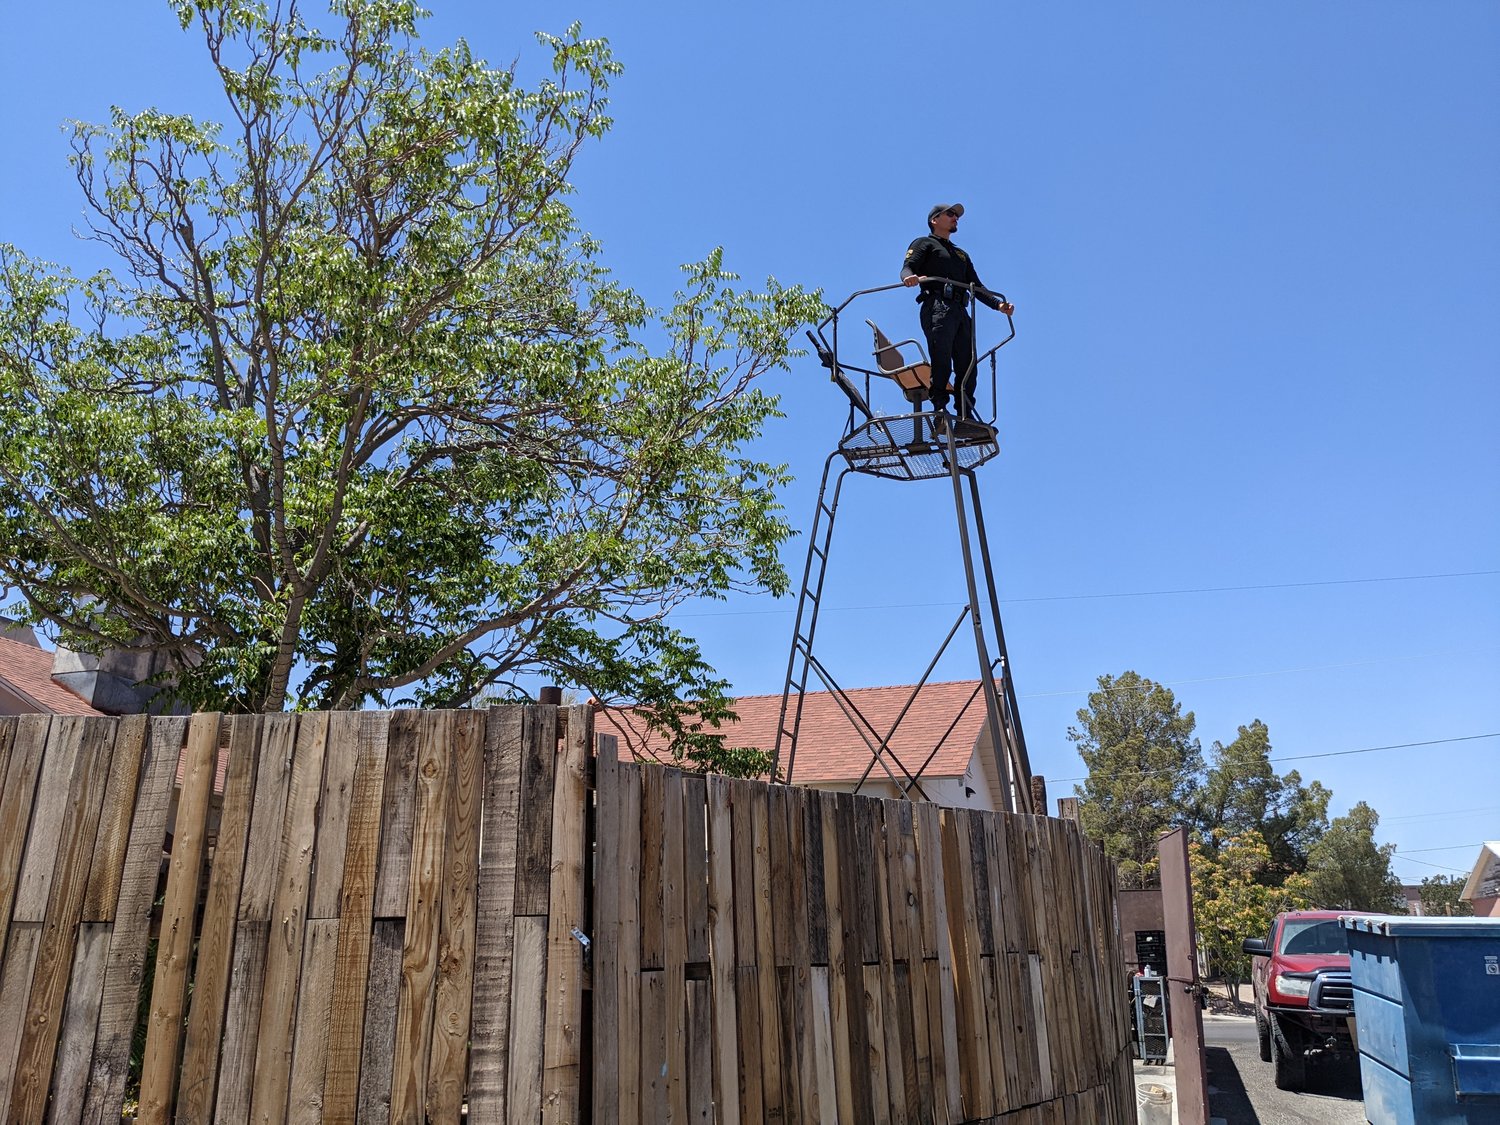 Business owner Marci Dickerson installed a 20-foot tower overlooking her parking lot at Game 1, so security has a better look at the parking lot.